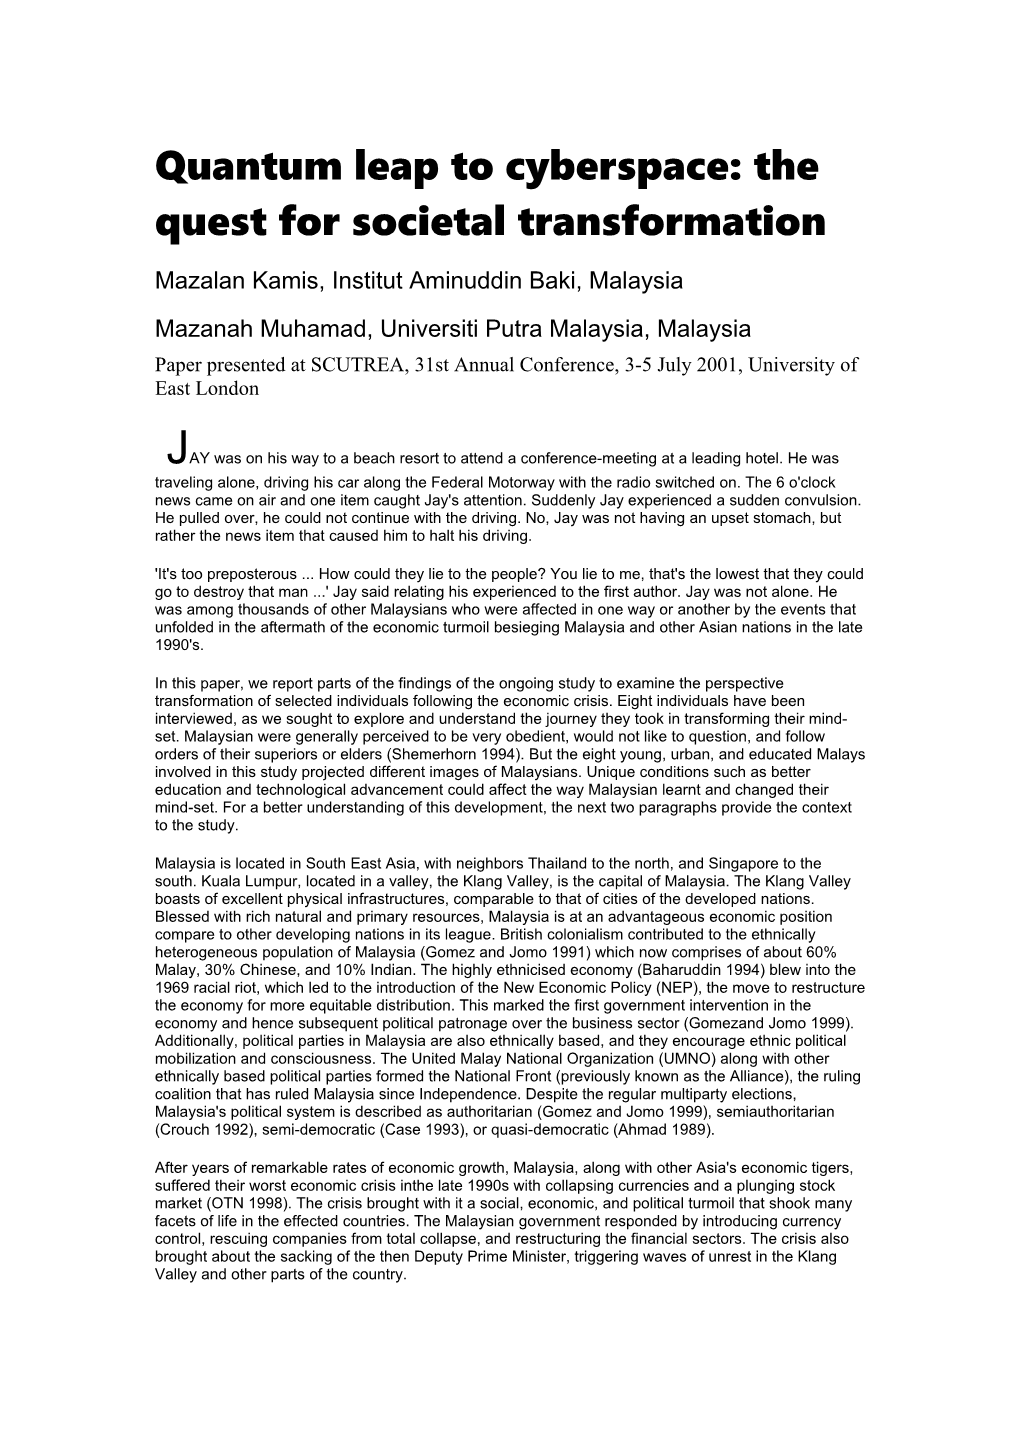 Quantum Leap to Cyberspace: the Quest for Societal Transformation